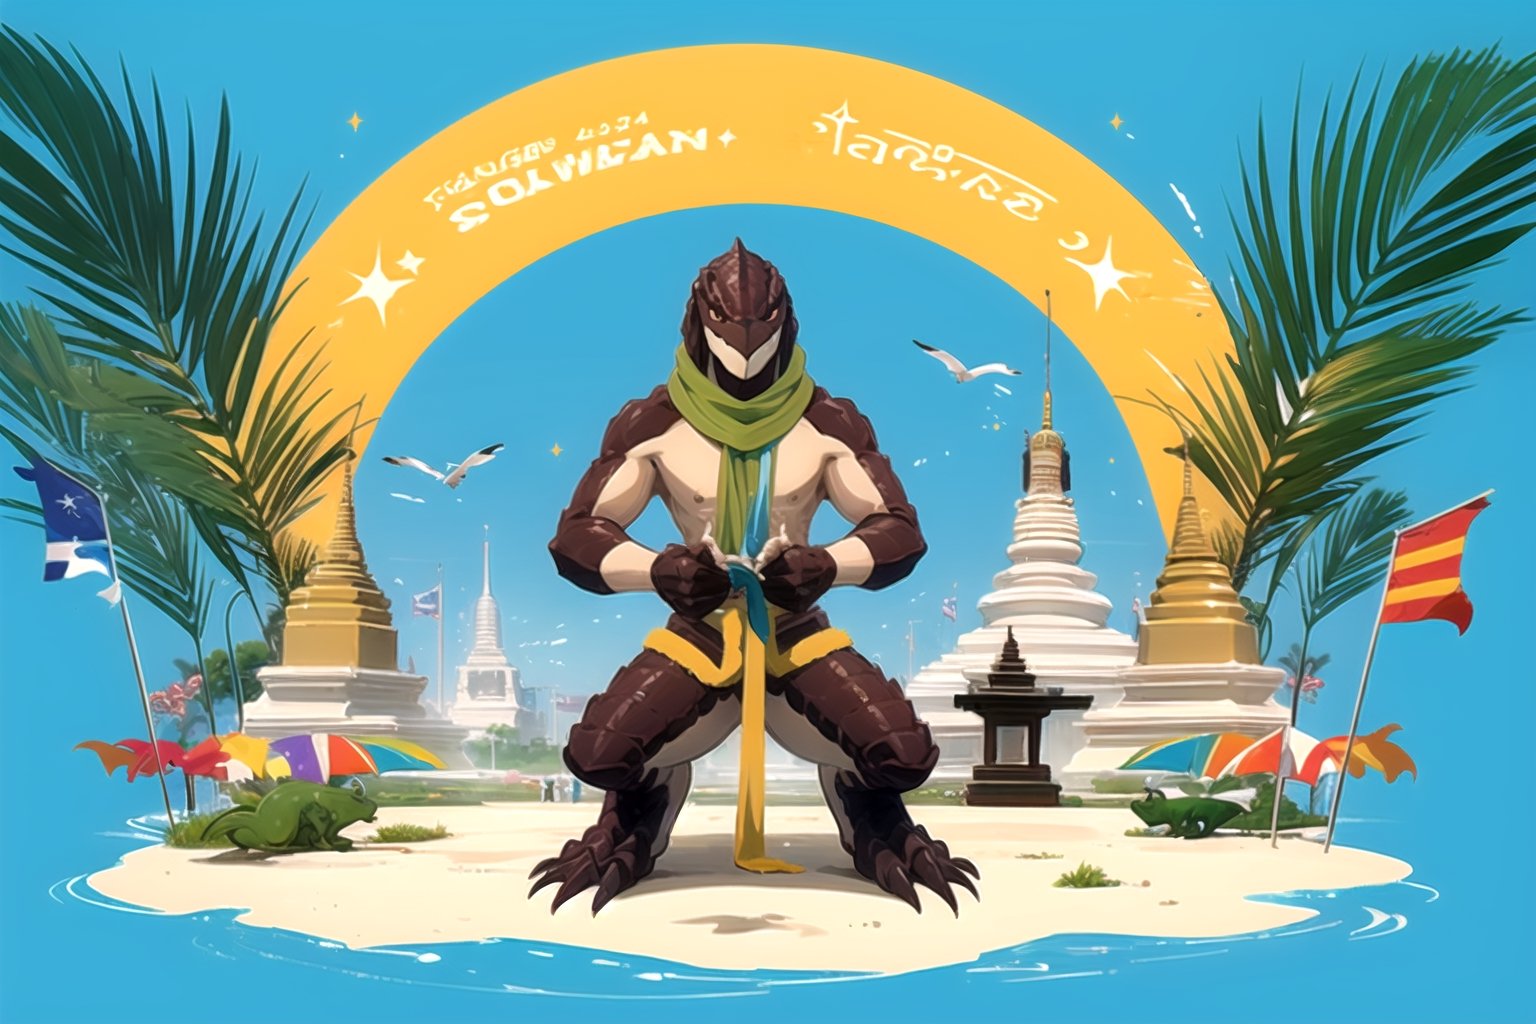 //Quality,
(masterpiece), (best quality), 8k illustration,
//Character,
1lizardman, solo, , , ,

 ,, , dark brown skin, dark eyes,Songkran Festival, pale green scarf, 

Songkran day, water splash, water festival, water gun, sand castle, water bucket, golden pagoda, golden temple, festival flags, effect of flowing water, colorful style, Thailand decoration, colorful swimming glasses,masterpiece, Zaryusu Shasha 